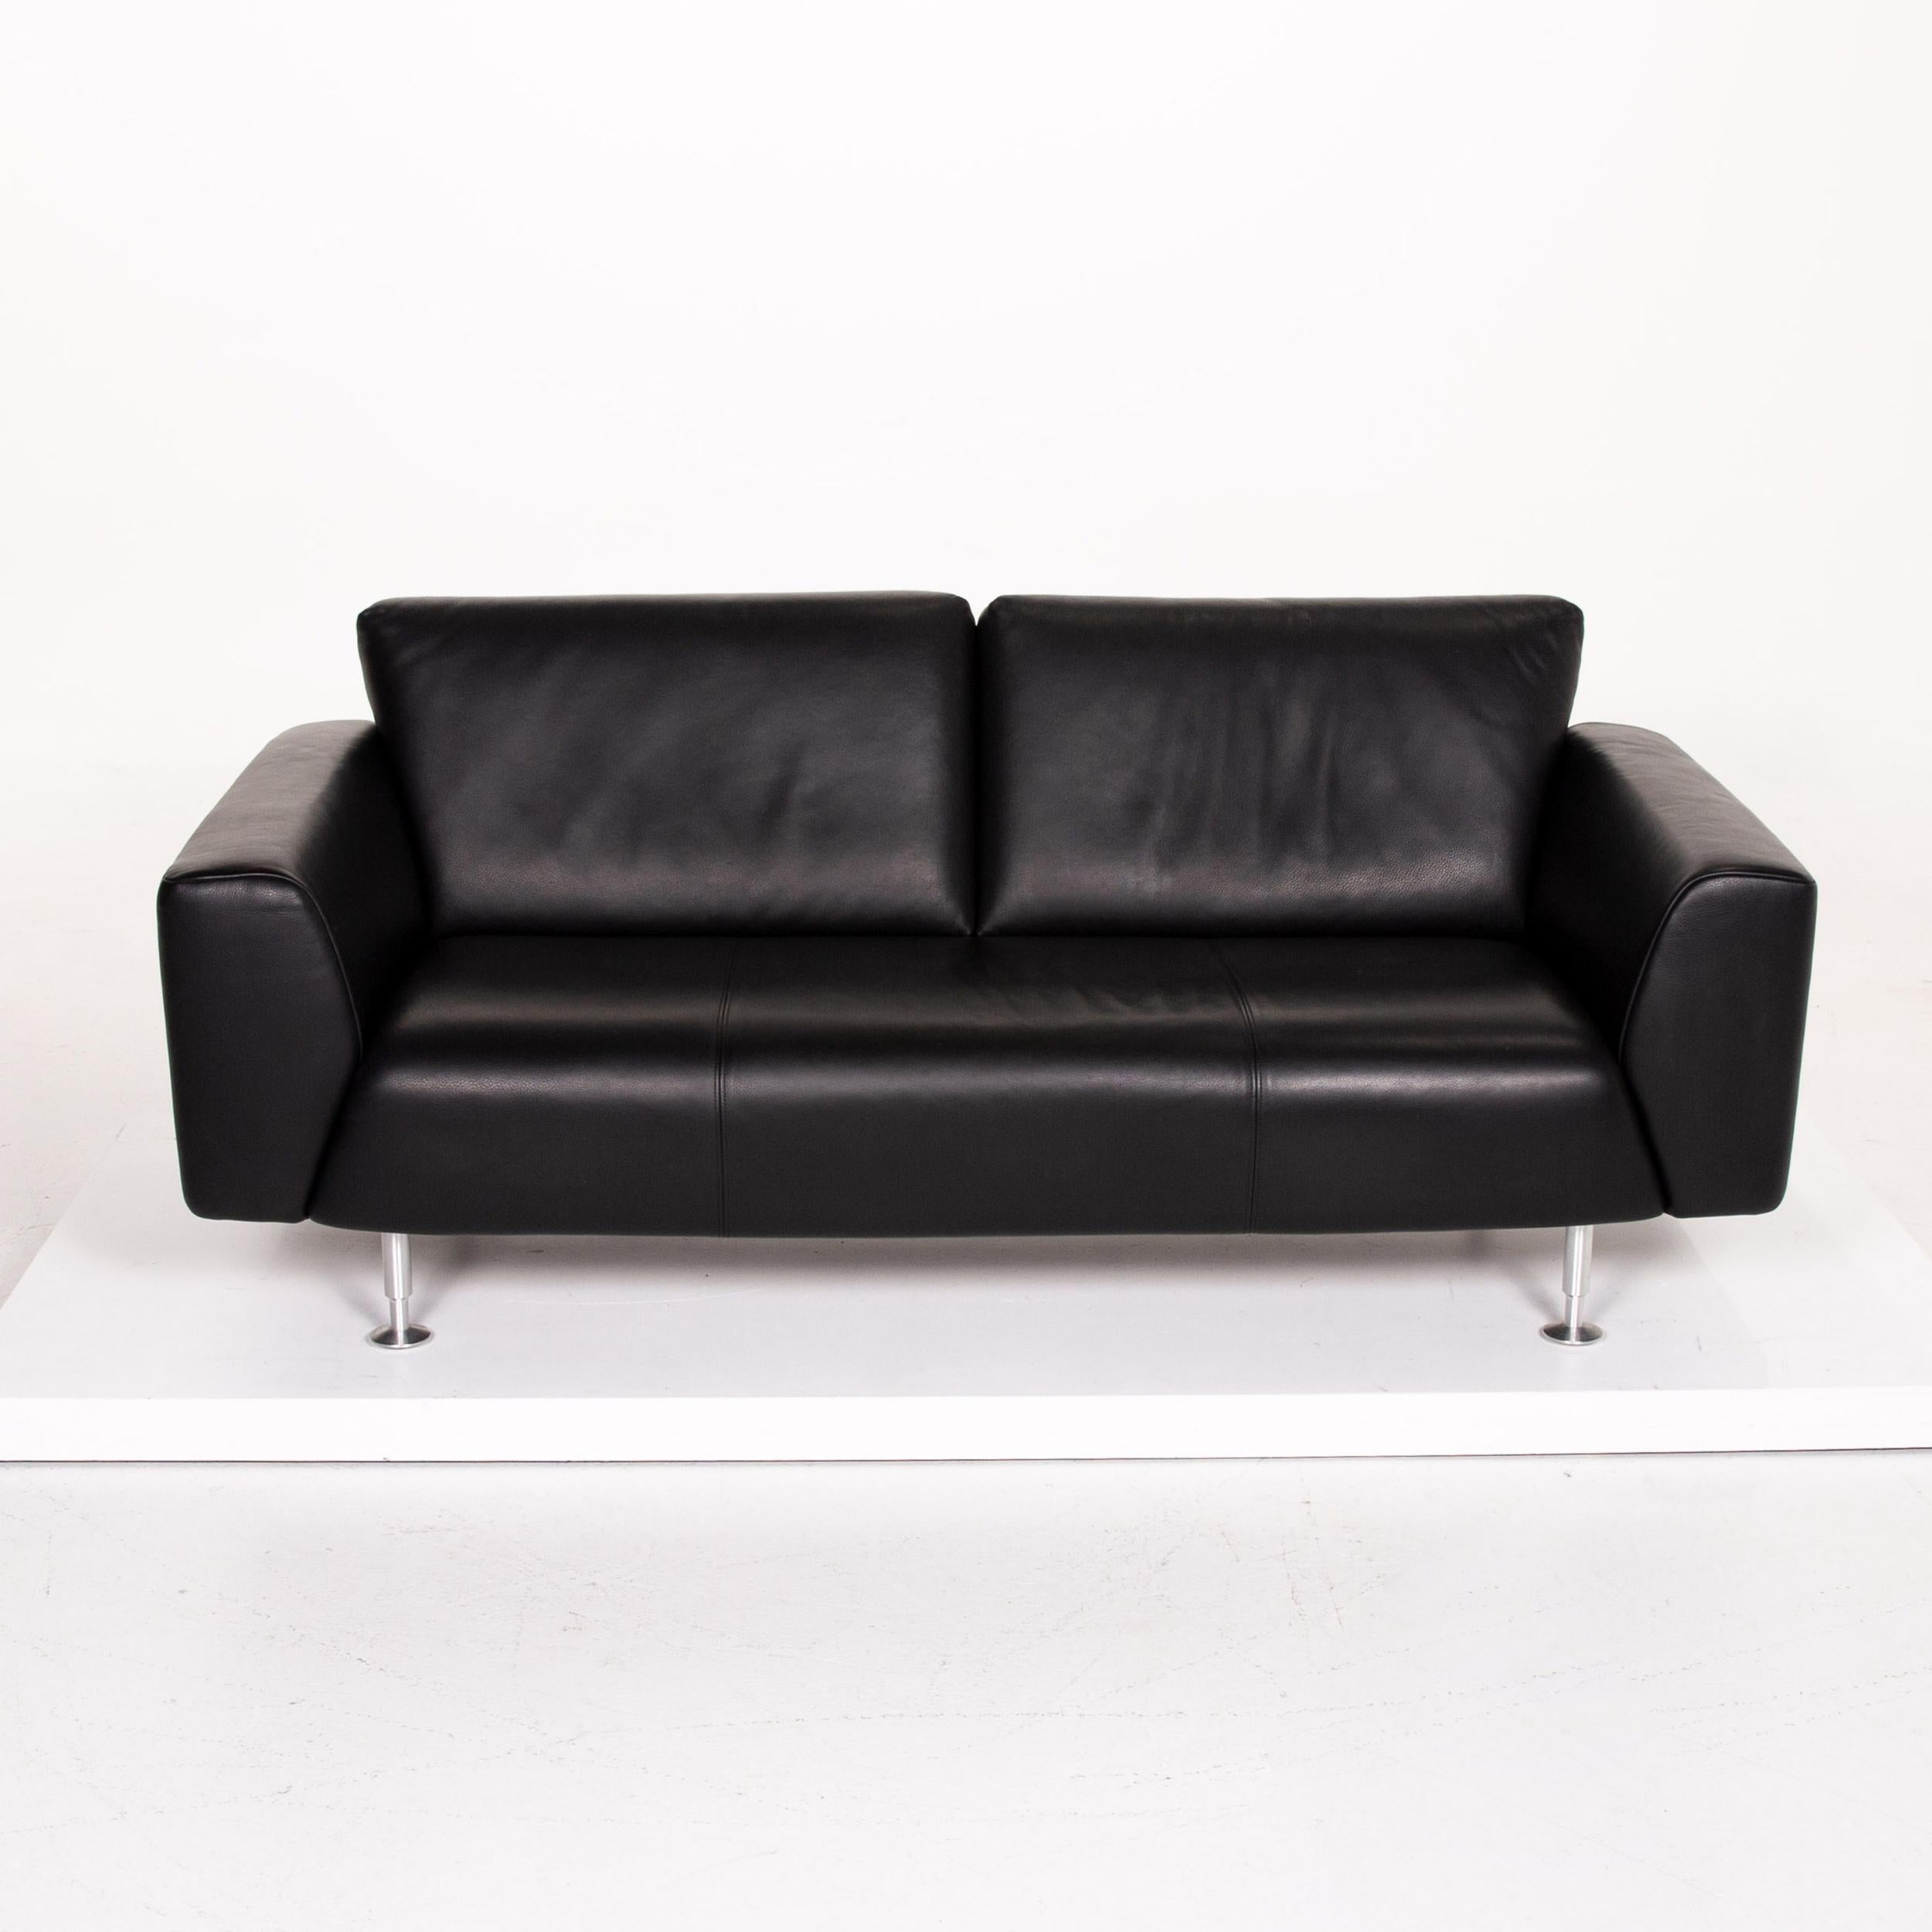 Rolf Benz Leather Sofa Black Three-Seat Couch For Sale 1